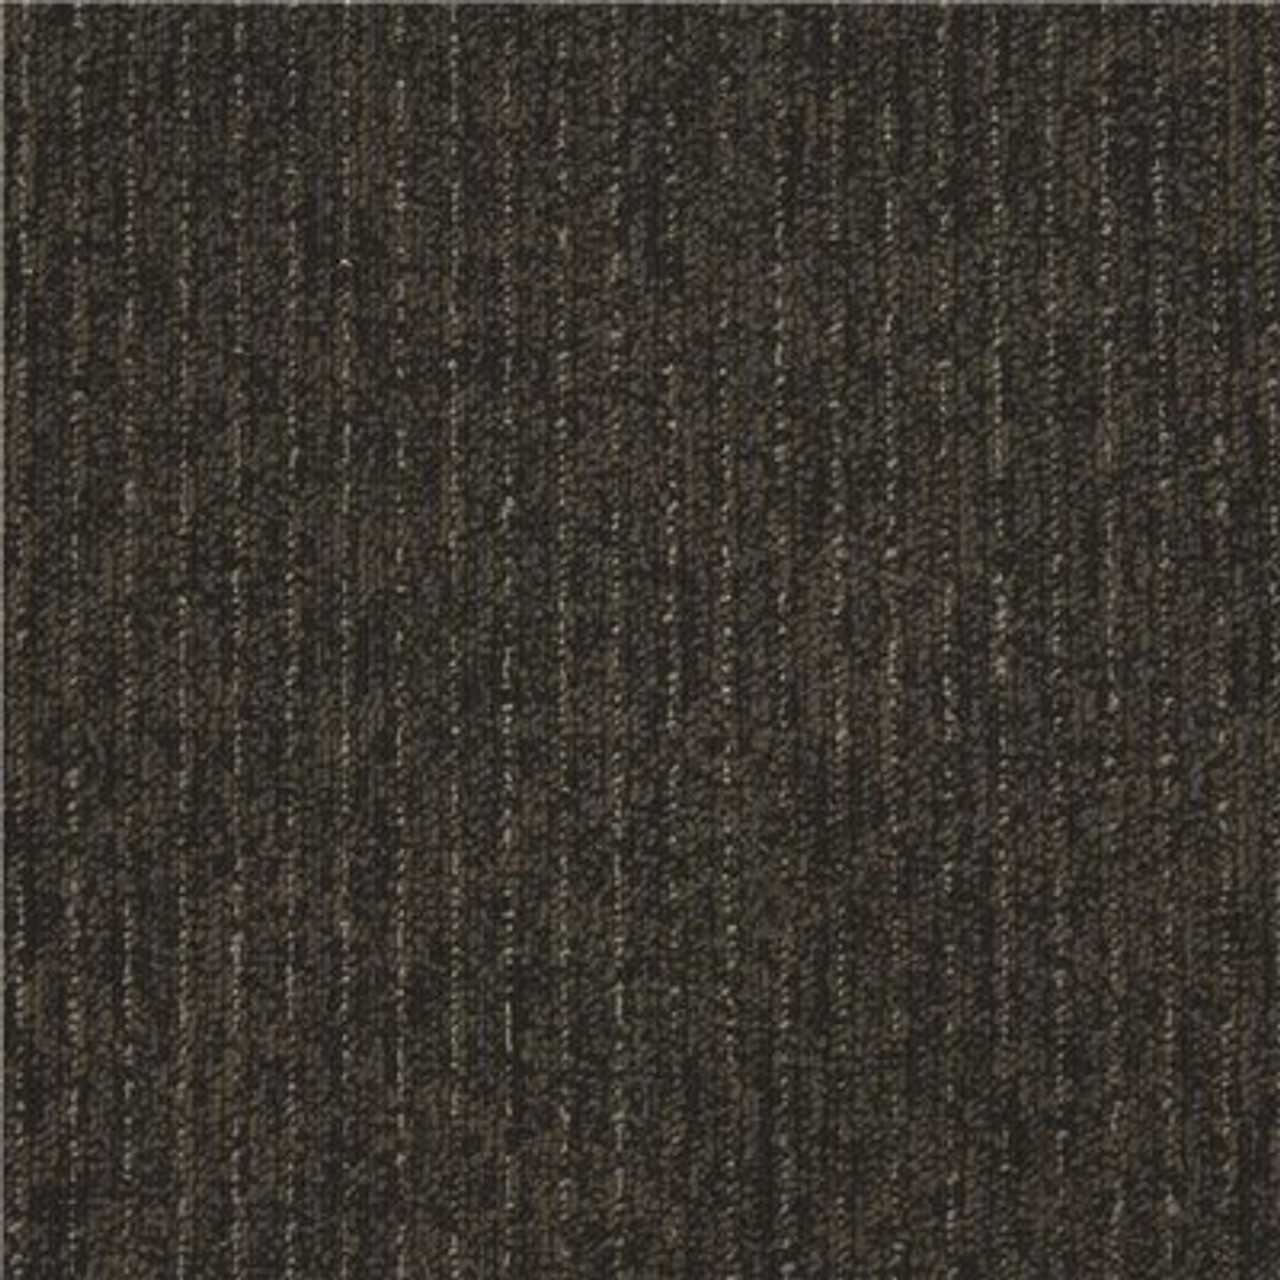 TrafficMaster Surge Brown Residential/Commercial 19.7 in. x 19.7 Glue-Down Carpet Tile (20 Tiles/Case) 54 sq. ft.